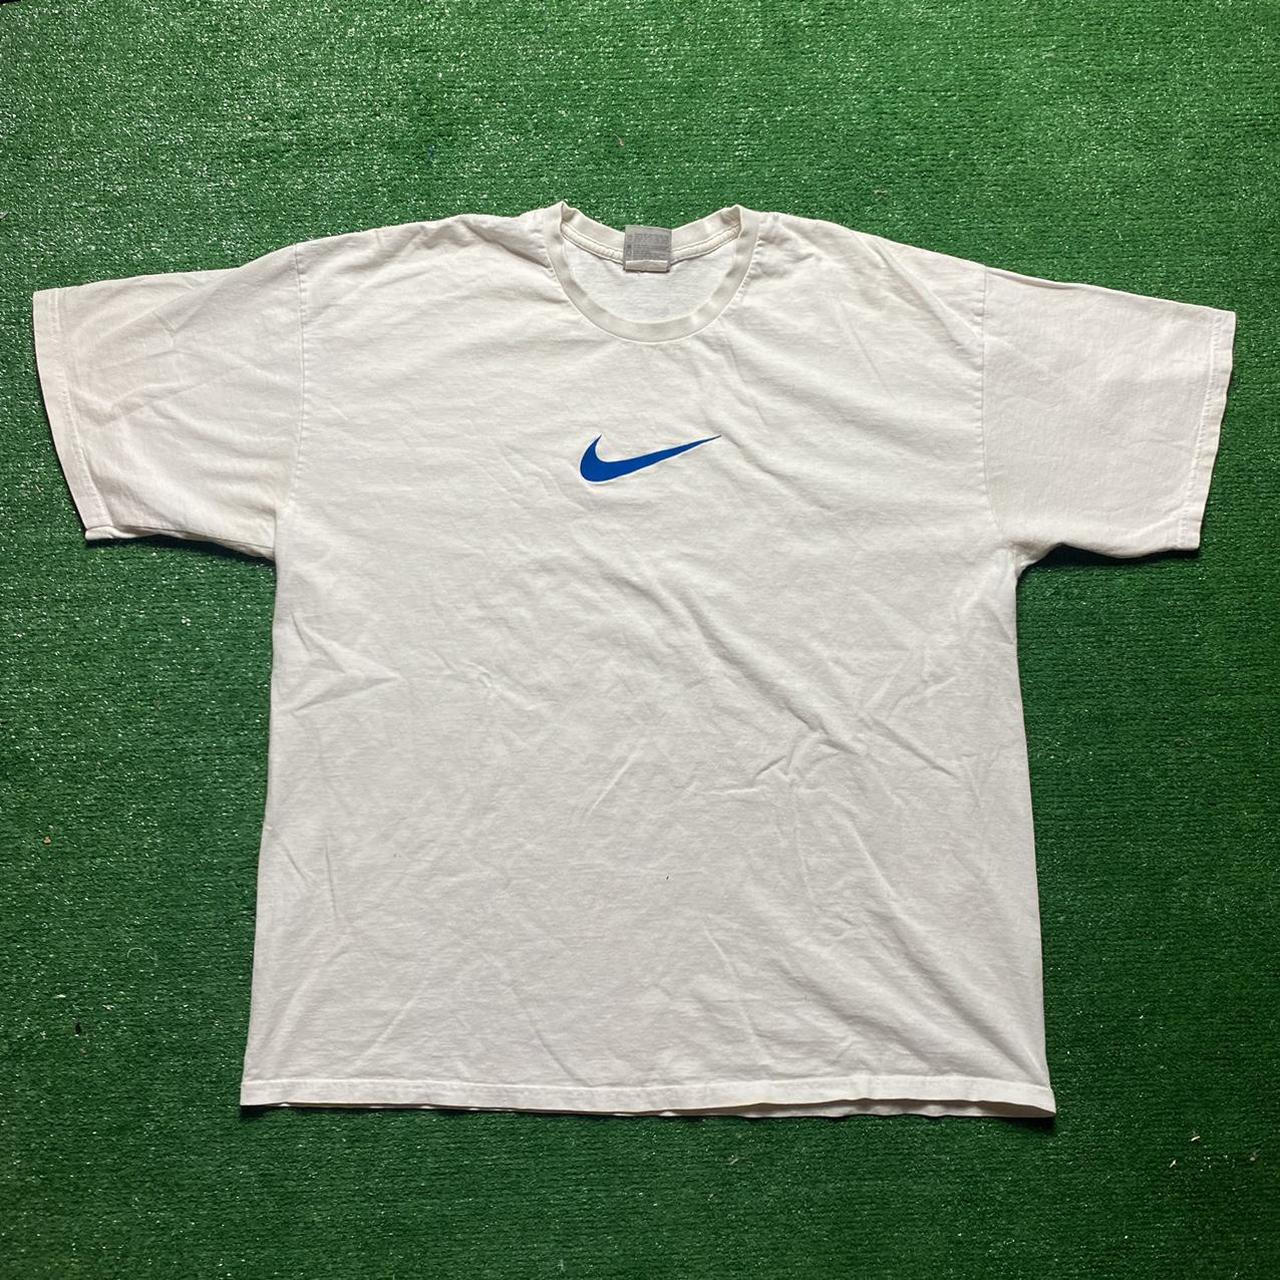 Product Image 1 - y2k nike shirt. no stains